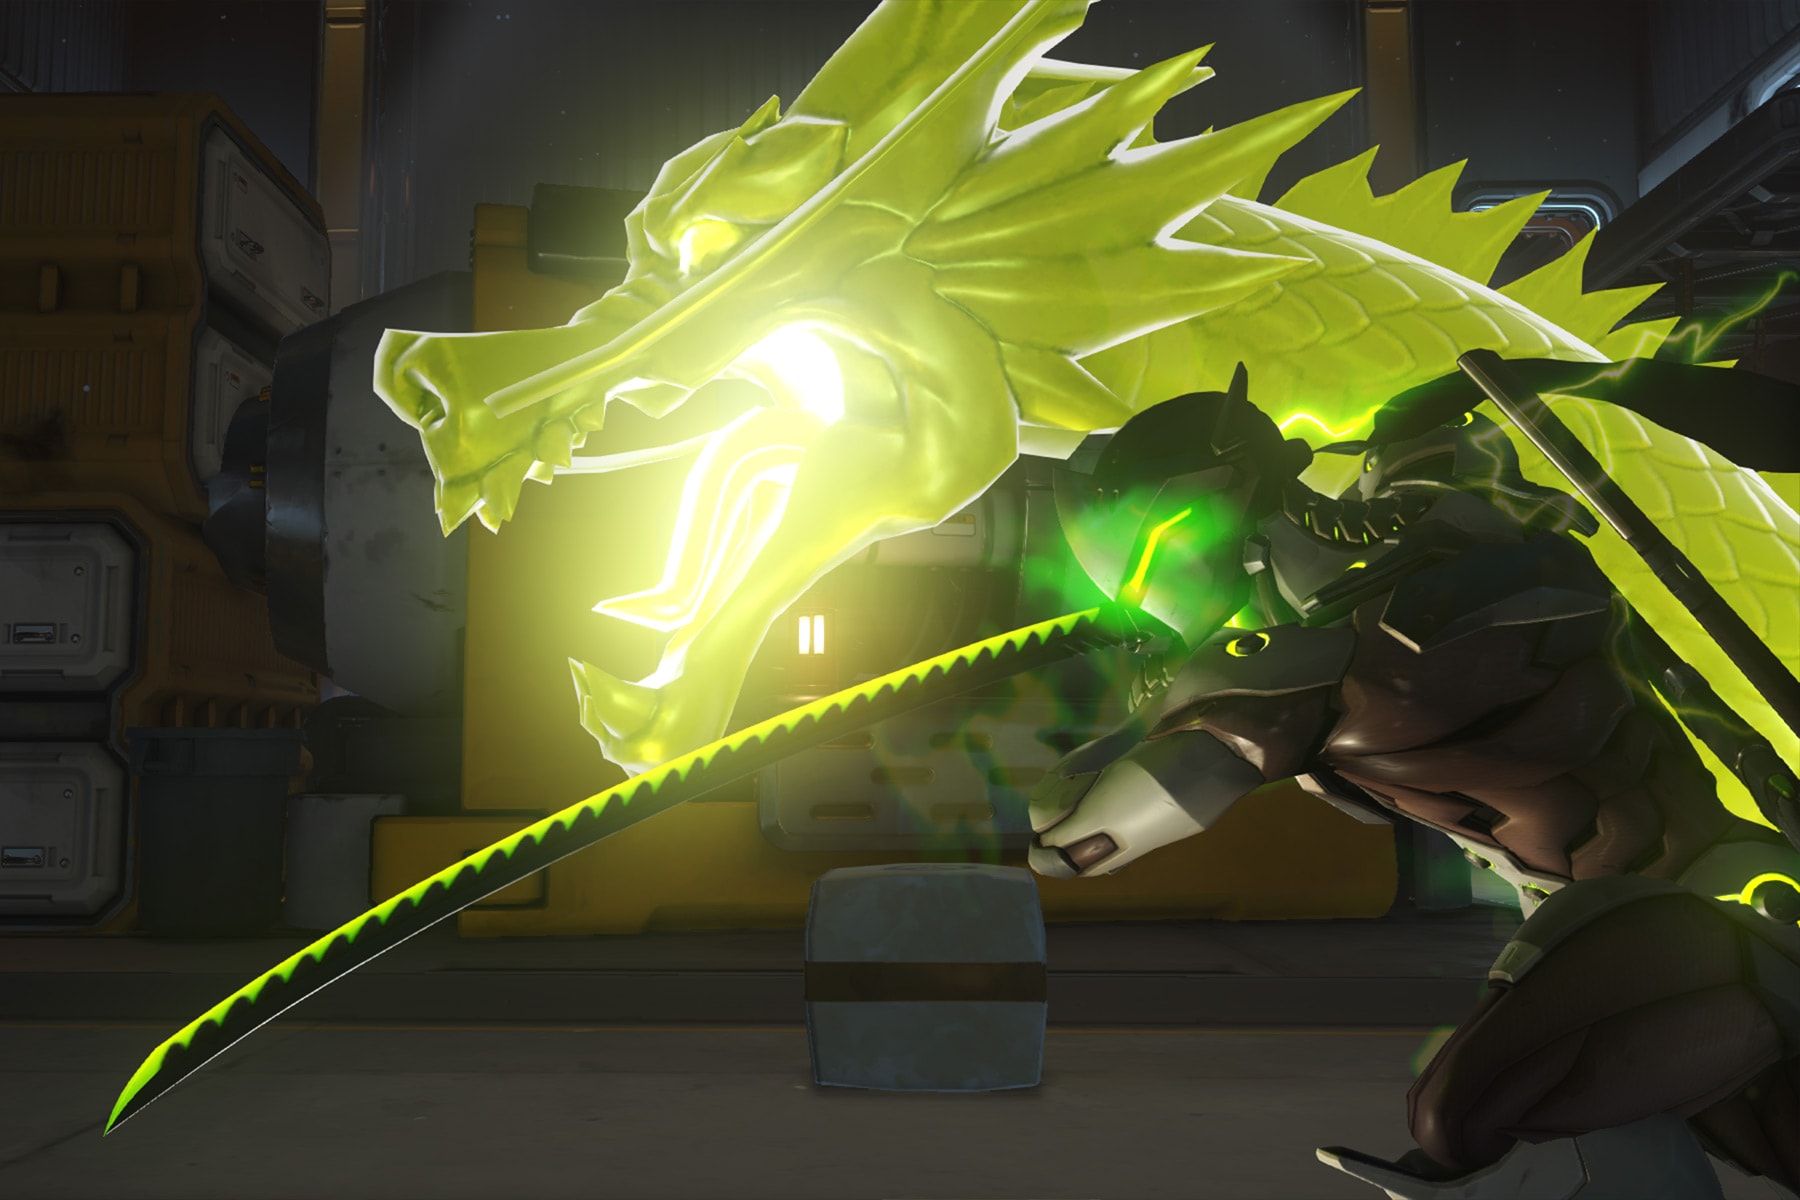 Screenshot from Overwatch featuring a yellow dragon